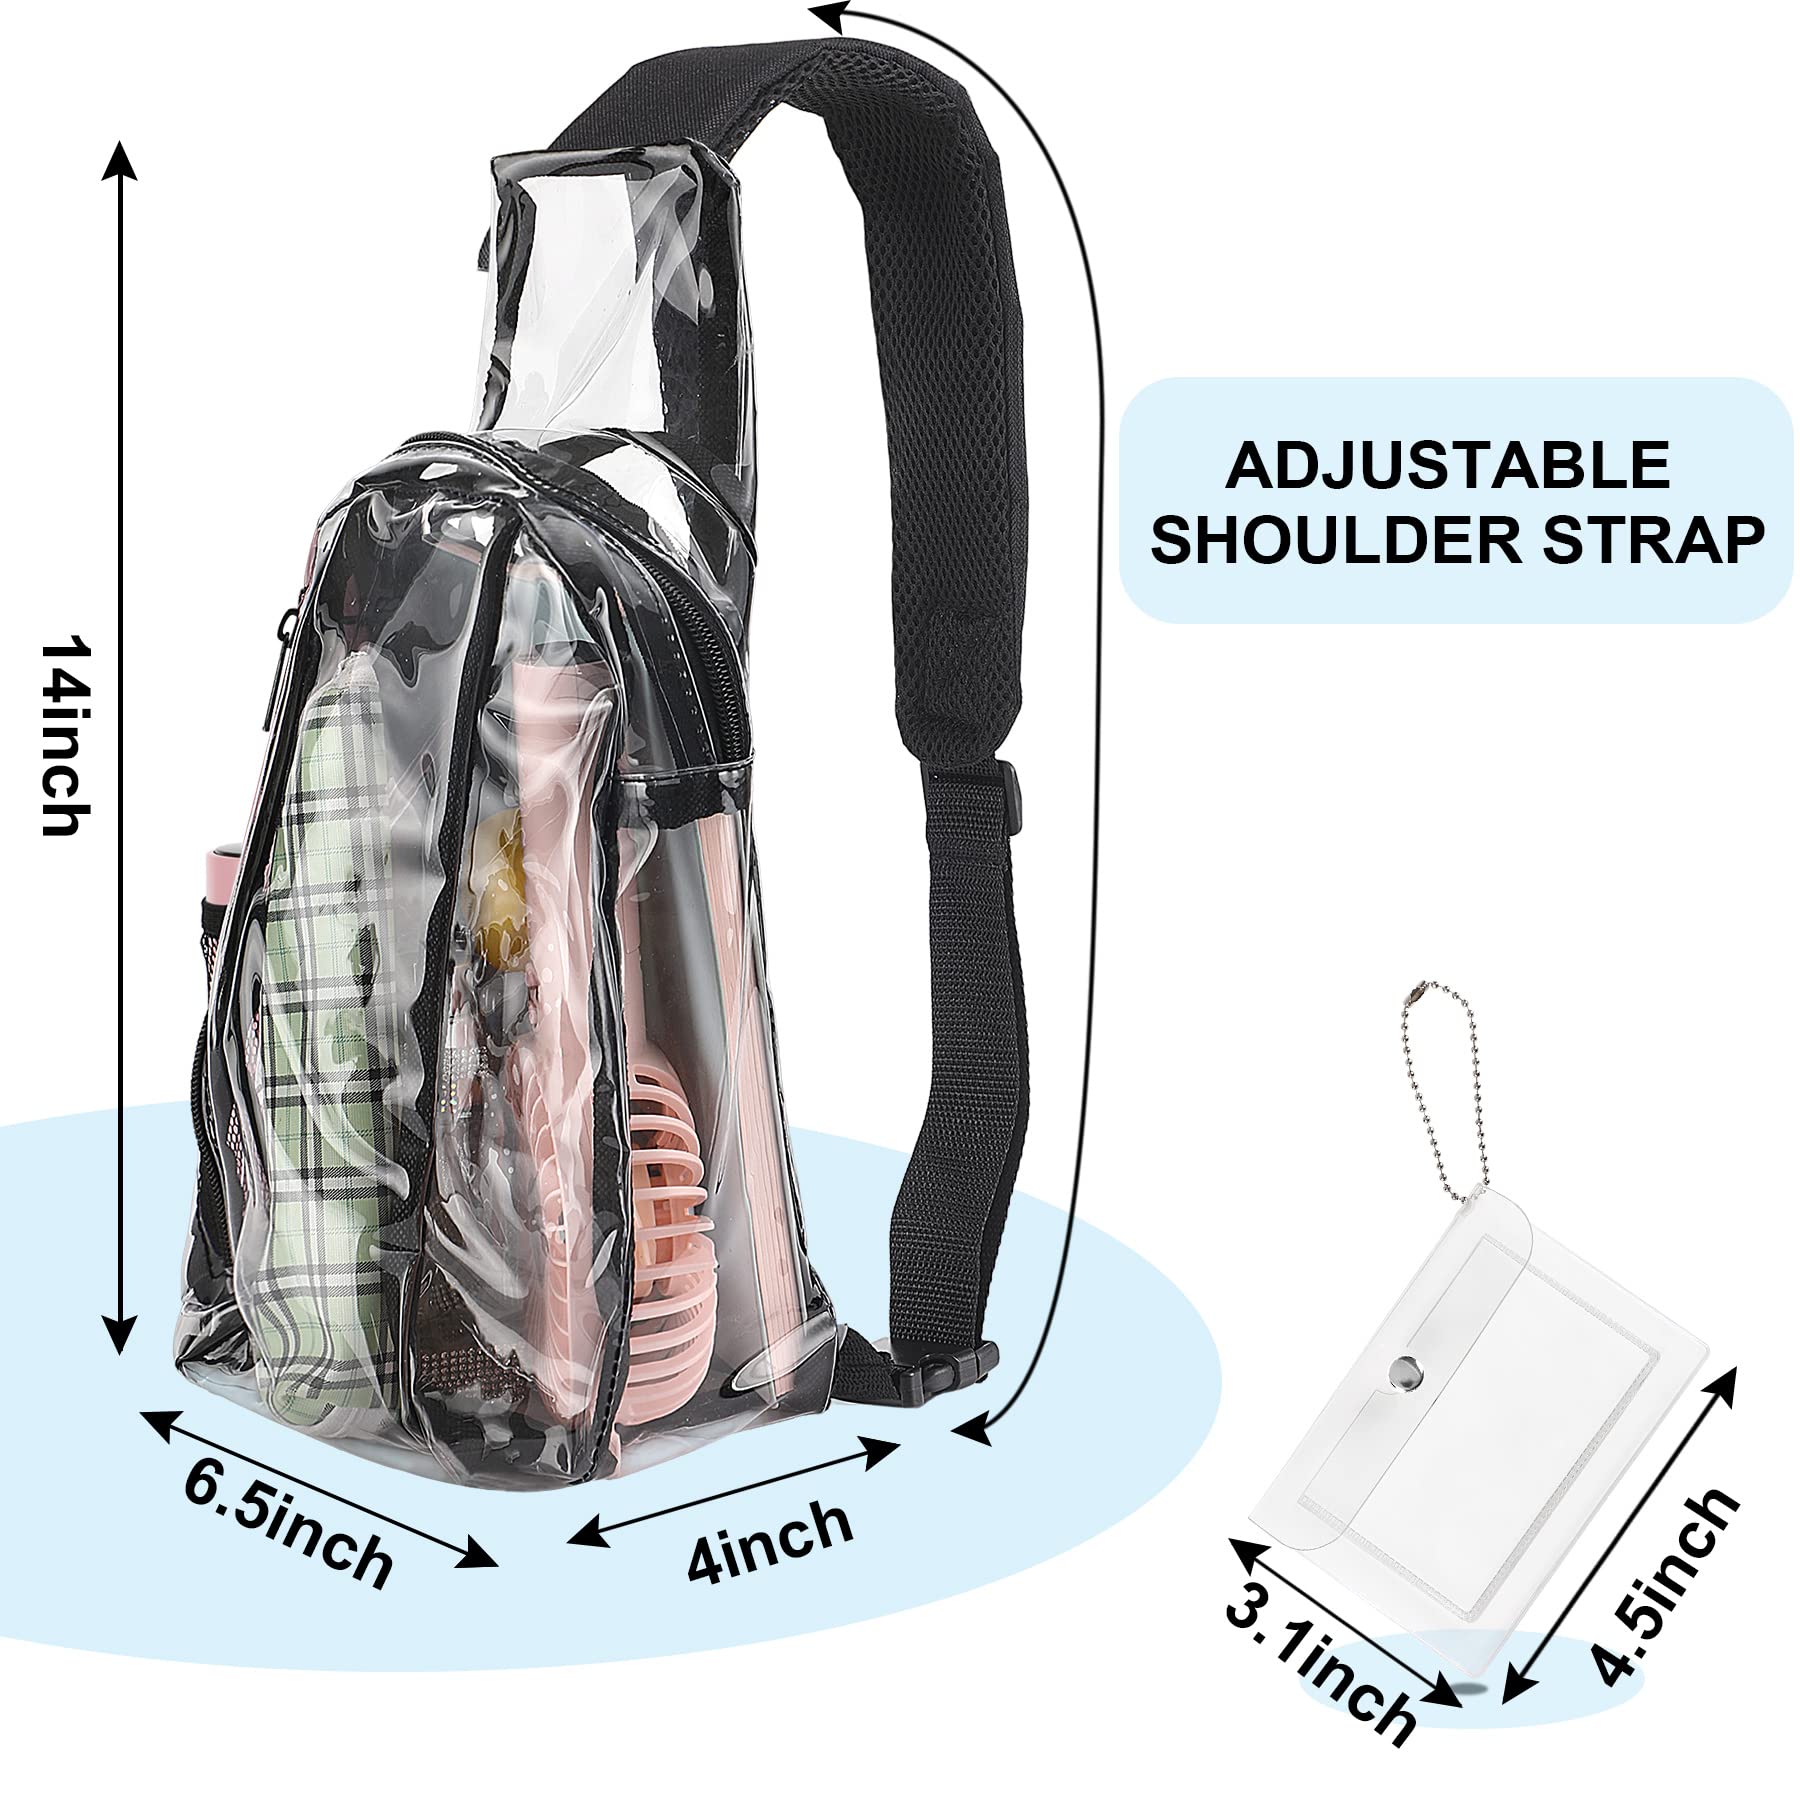 JULMELON Clear Sling Bag, Clear PVC Crossbody Chest Bag Stadium Approved, Backpack with Adjustable Strap for Men Women Hiking, Stadium or Concerts